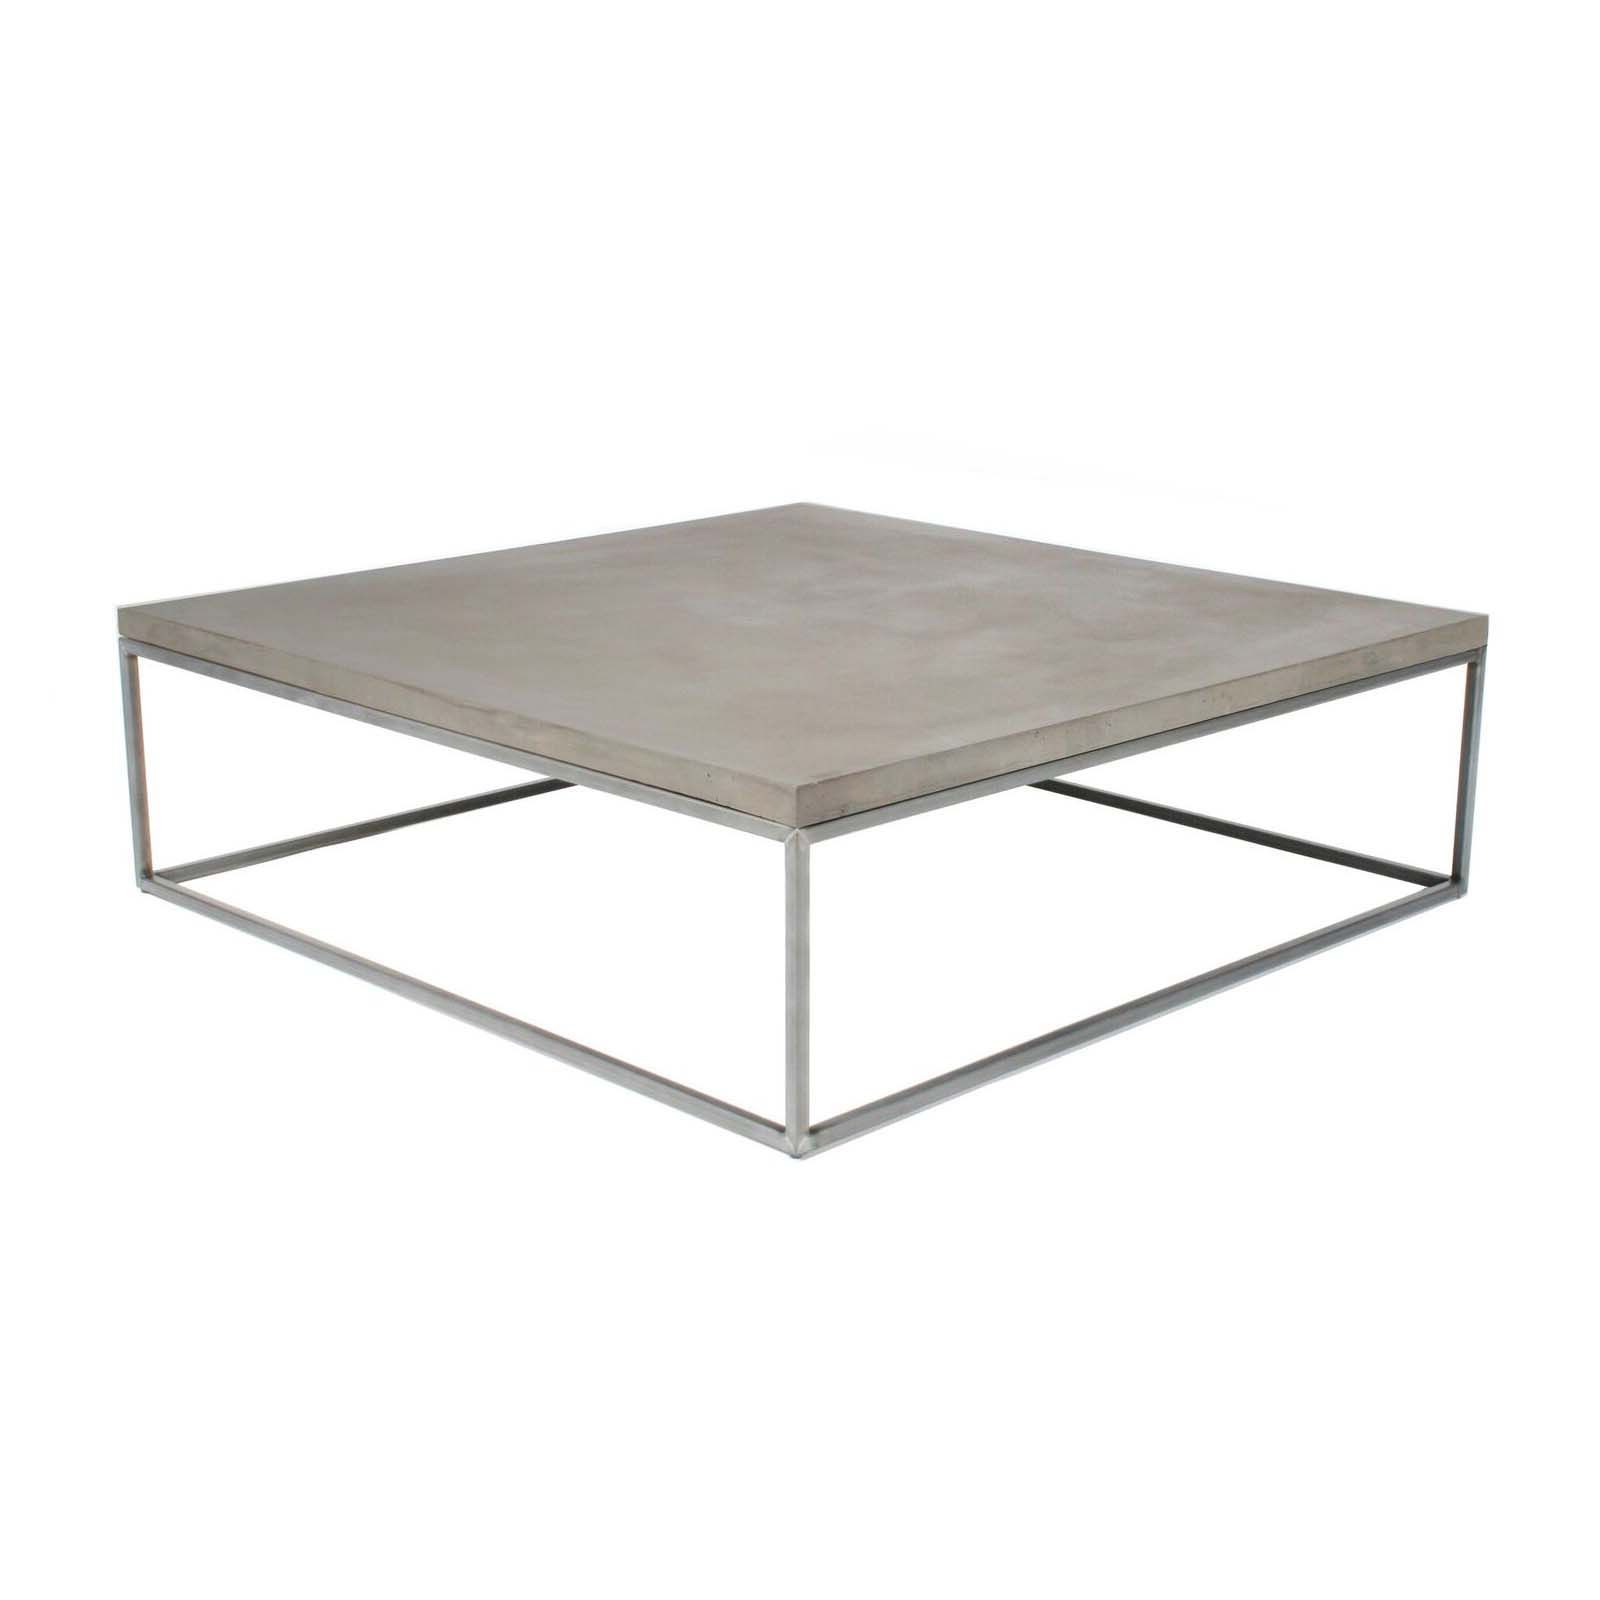 2019 Modern Concrete Coffee Tables For Perspective Coffee Table – Finddesign (View 17 of 20)